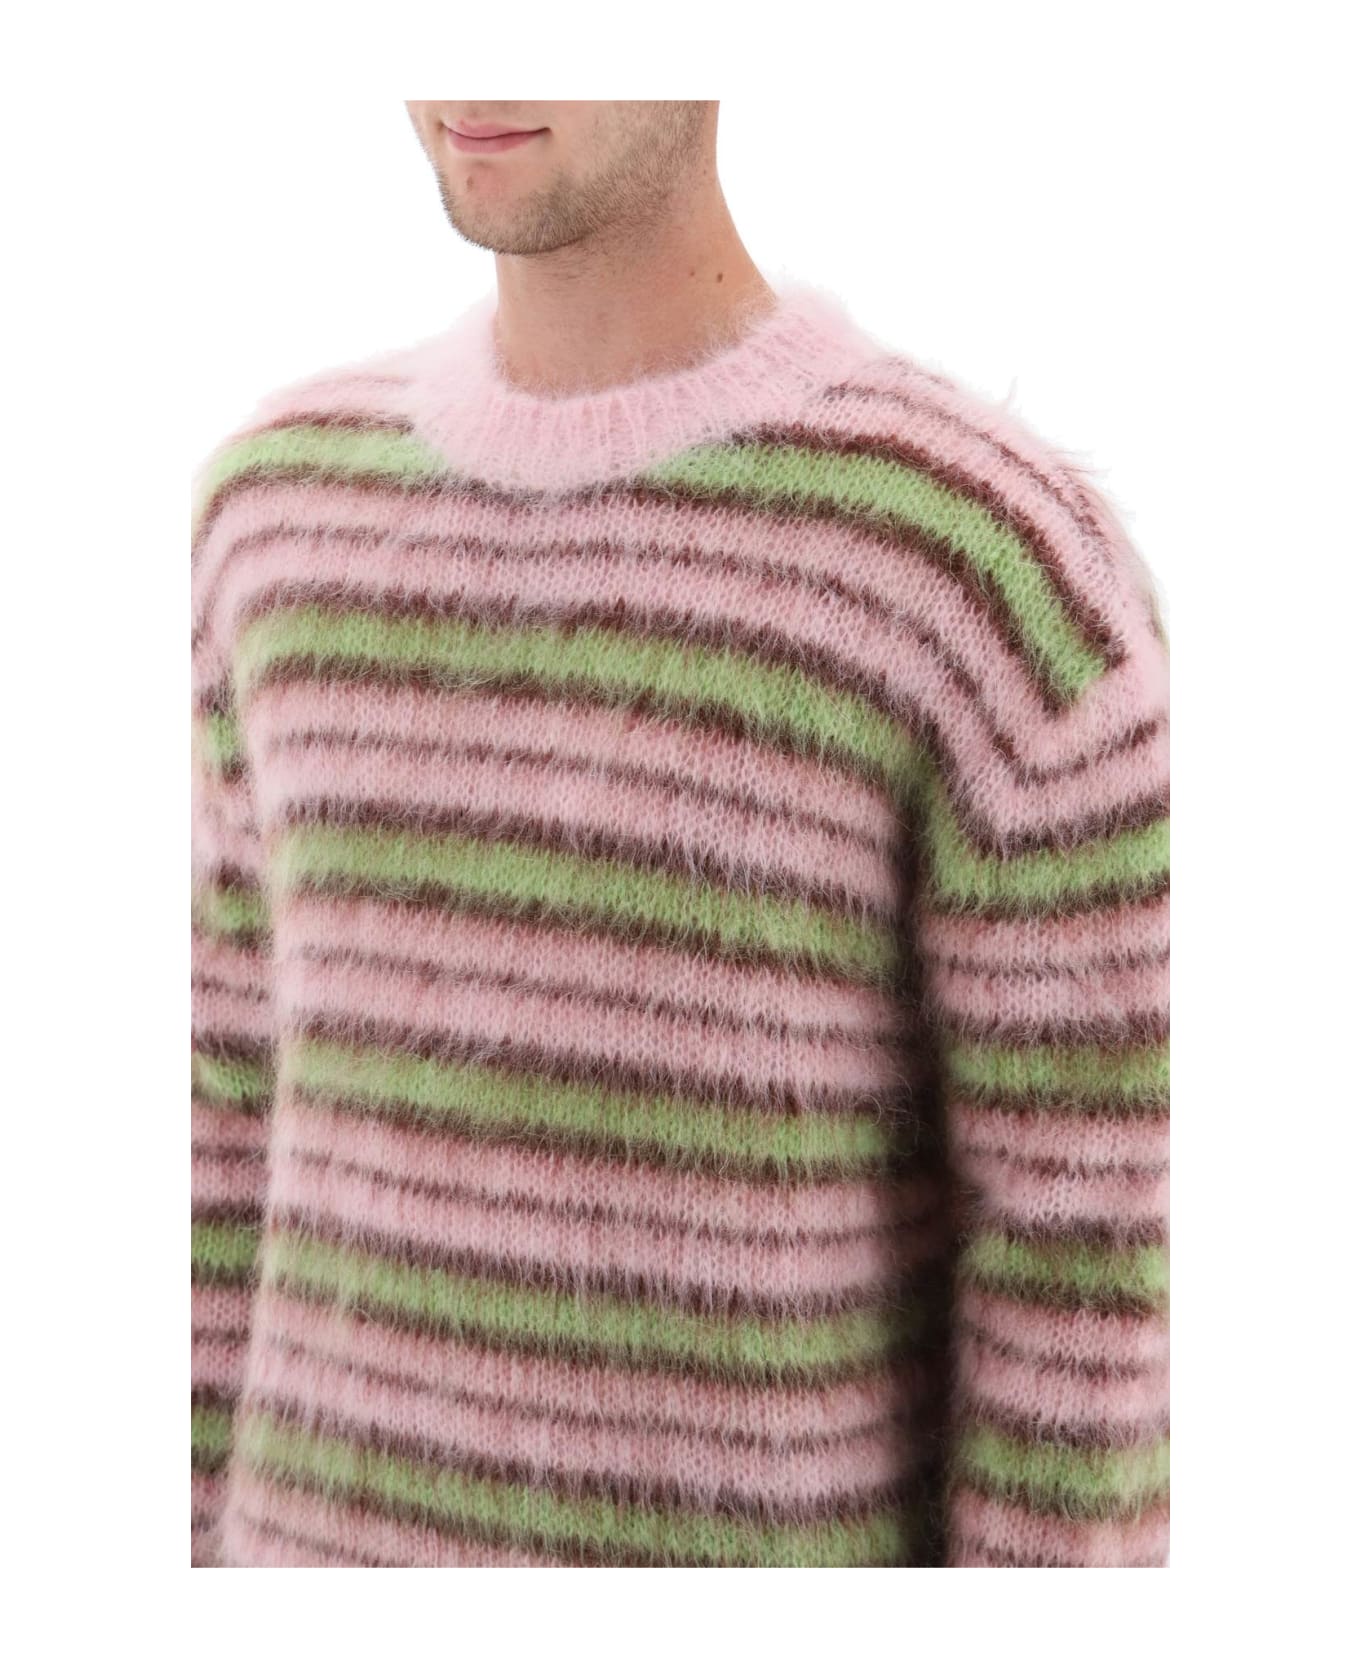 Marni Sweater In Brushed Mohair With Striped Motif - PINK